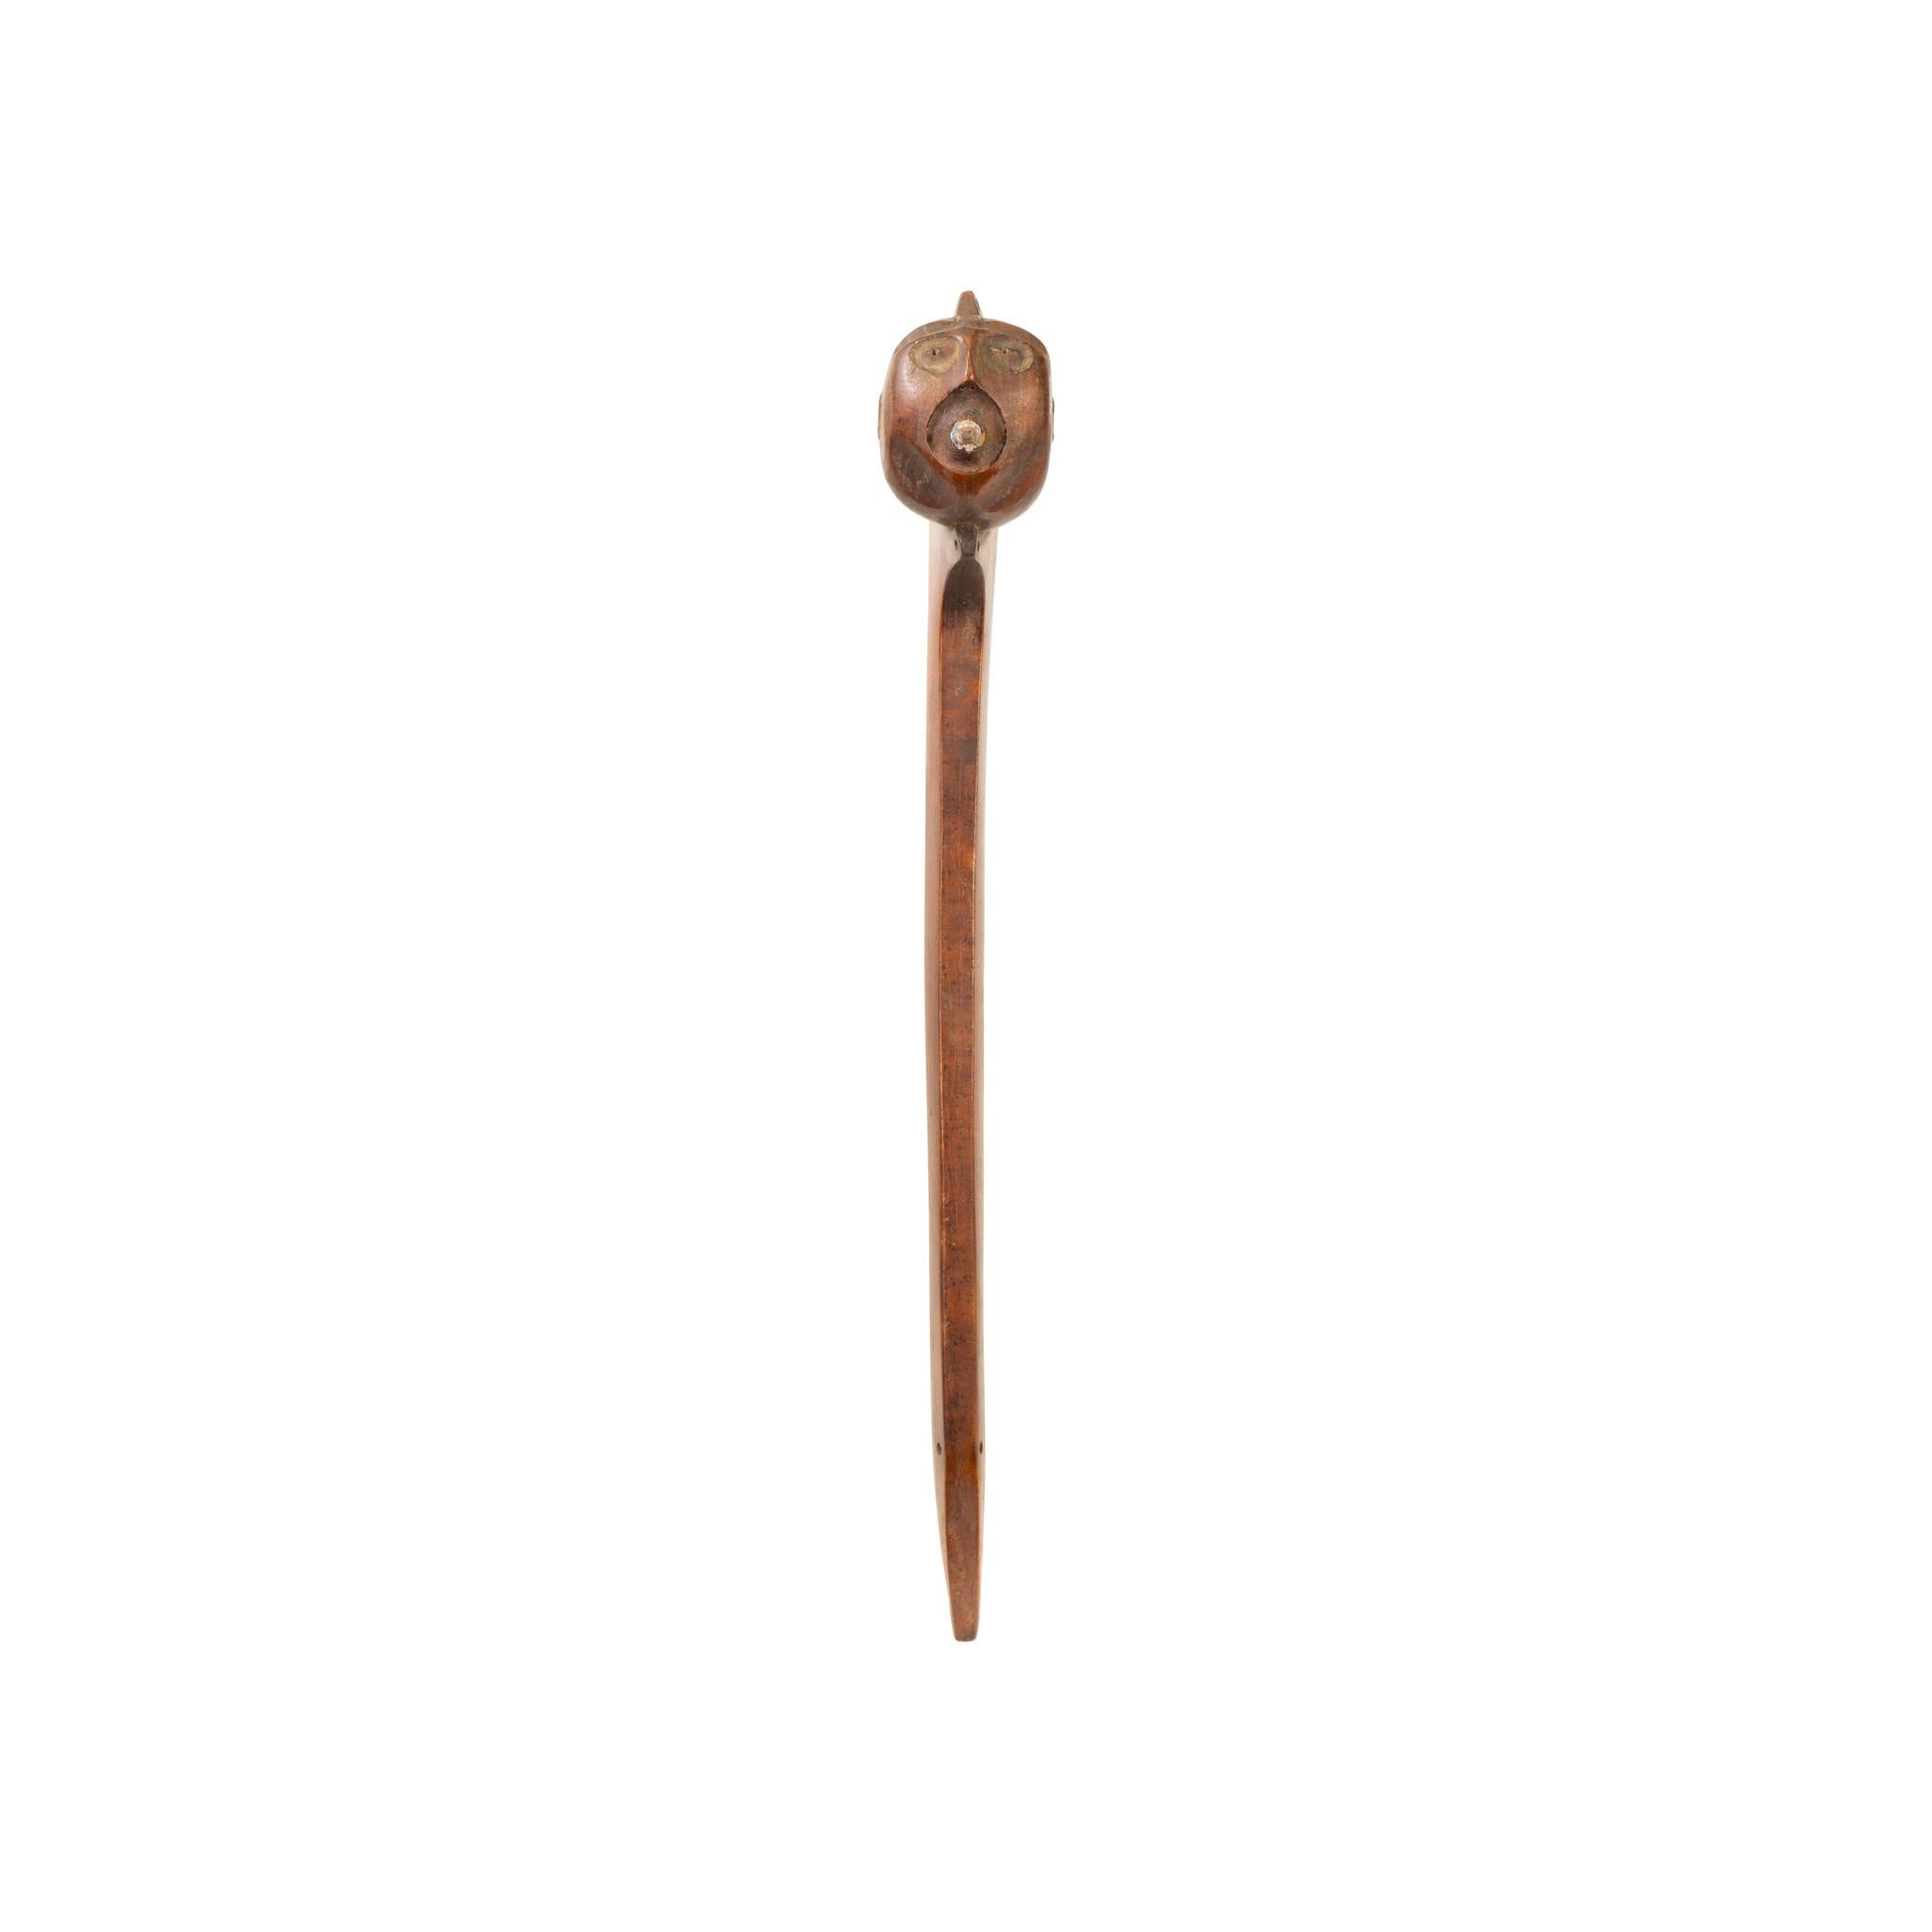 Eastern ball headed war club of native walnut with carved face having square nailed spike set in lead. Ex. Norm Johnson Estate.

Period: Mid-19th century
Origin: Eastern, US
Size: 21